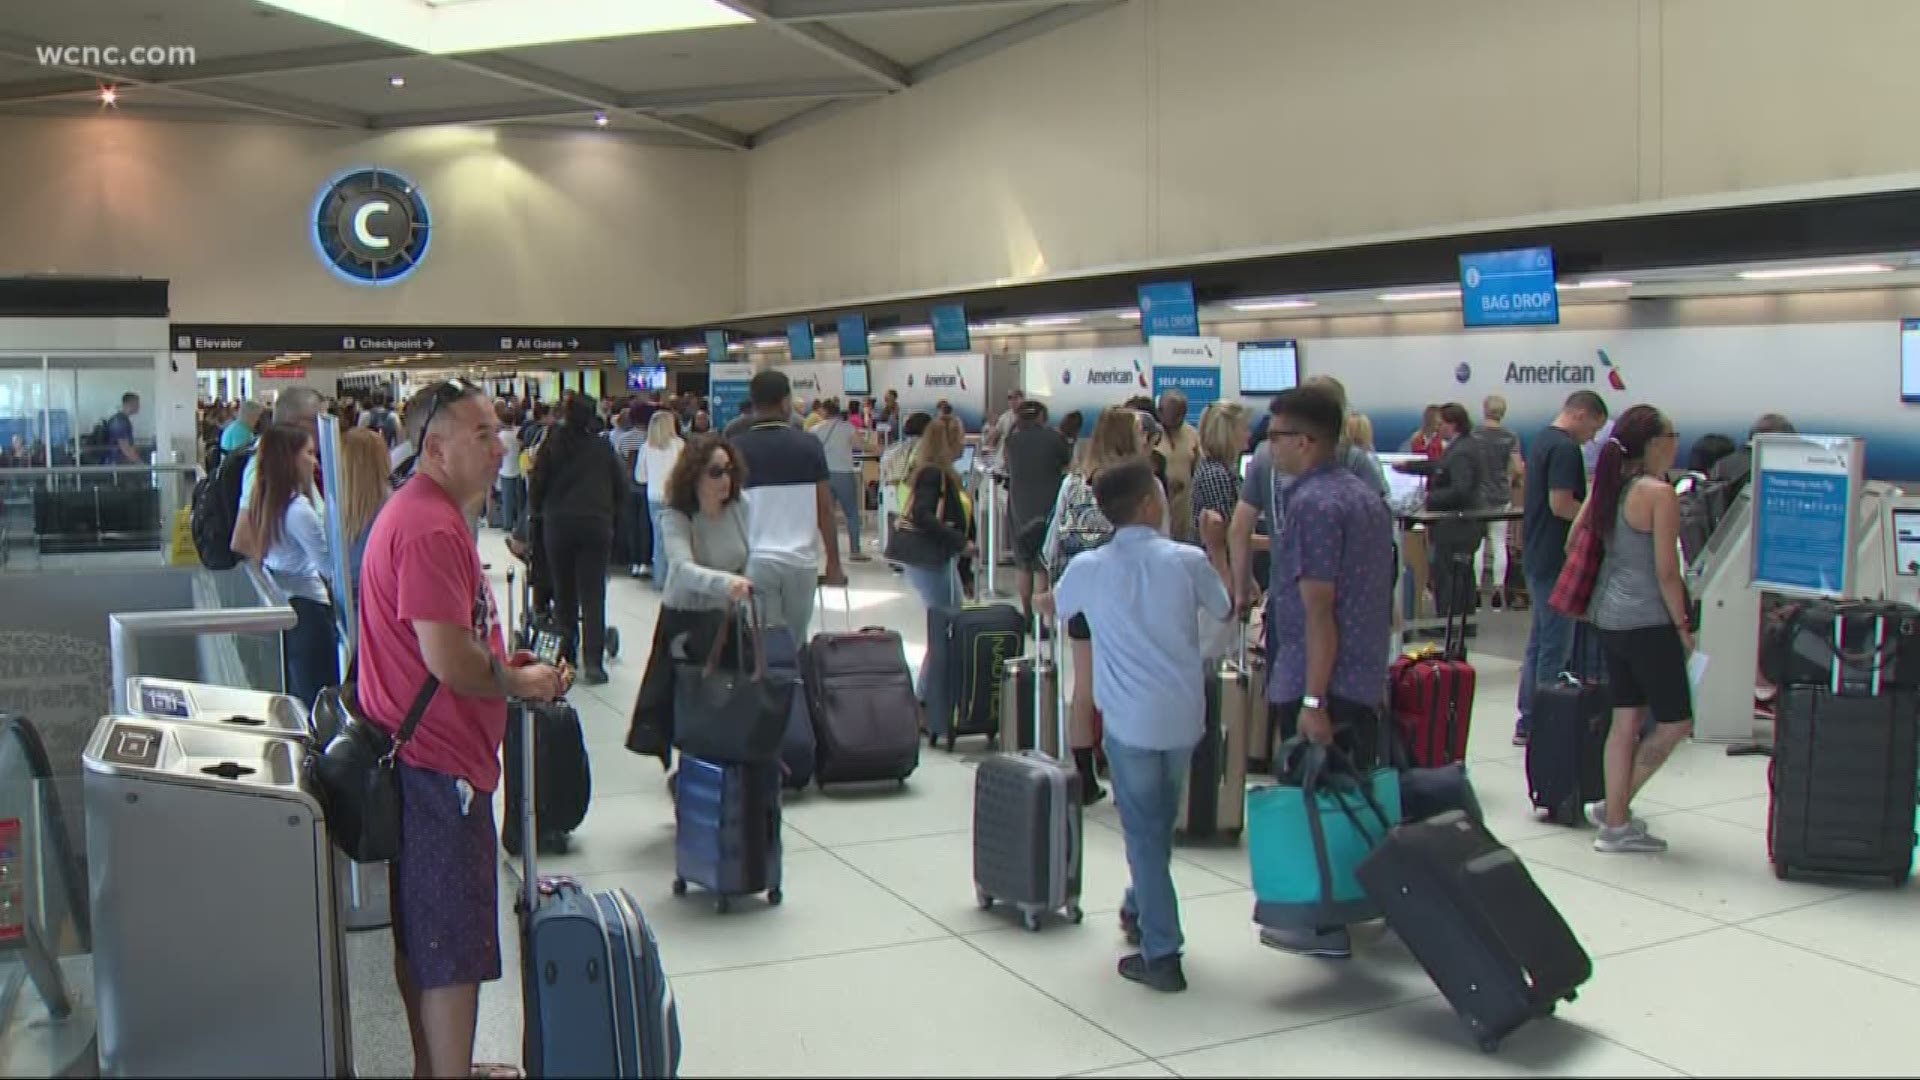 AAA estimates a record-breaking 49 million Americans made plans to get away this year.
Overall travel numbers are expected to go up more than 4% compared to 2018, with nearly 2 million more people planning vacations over the holiday weekend.